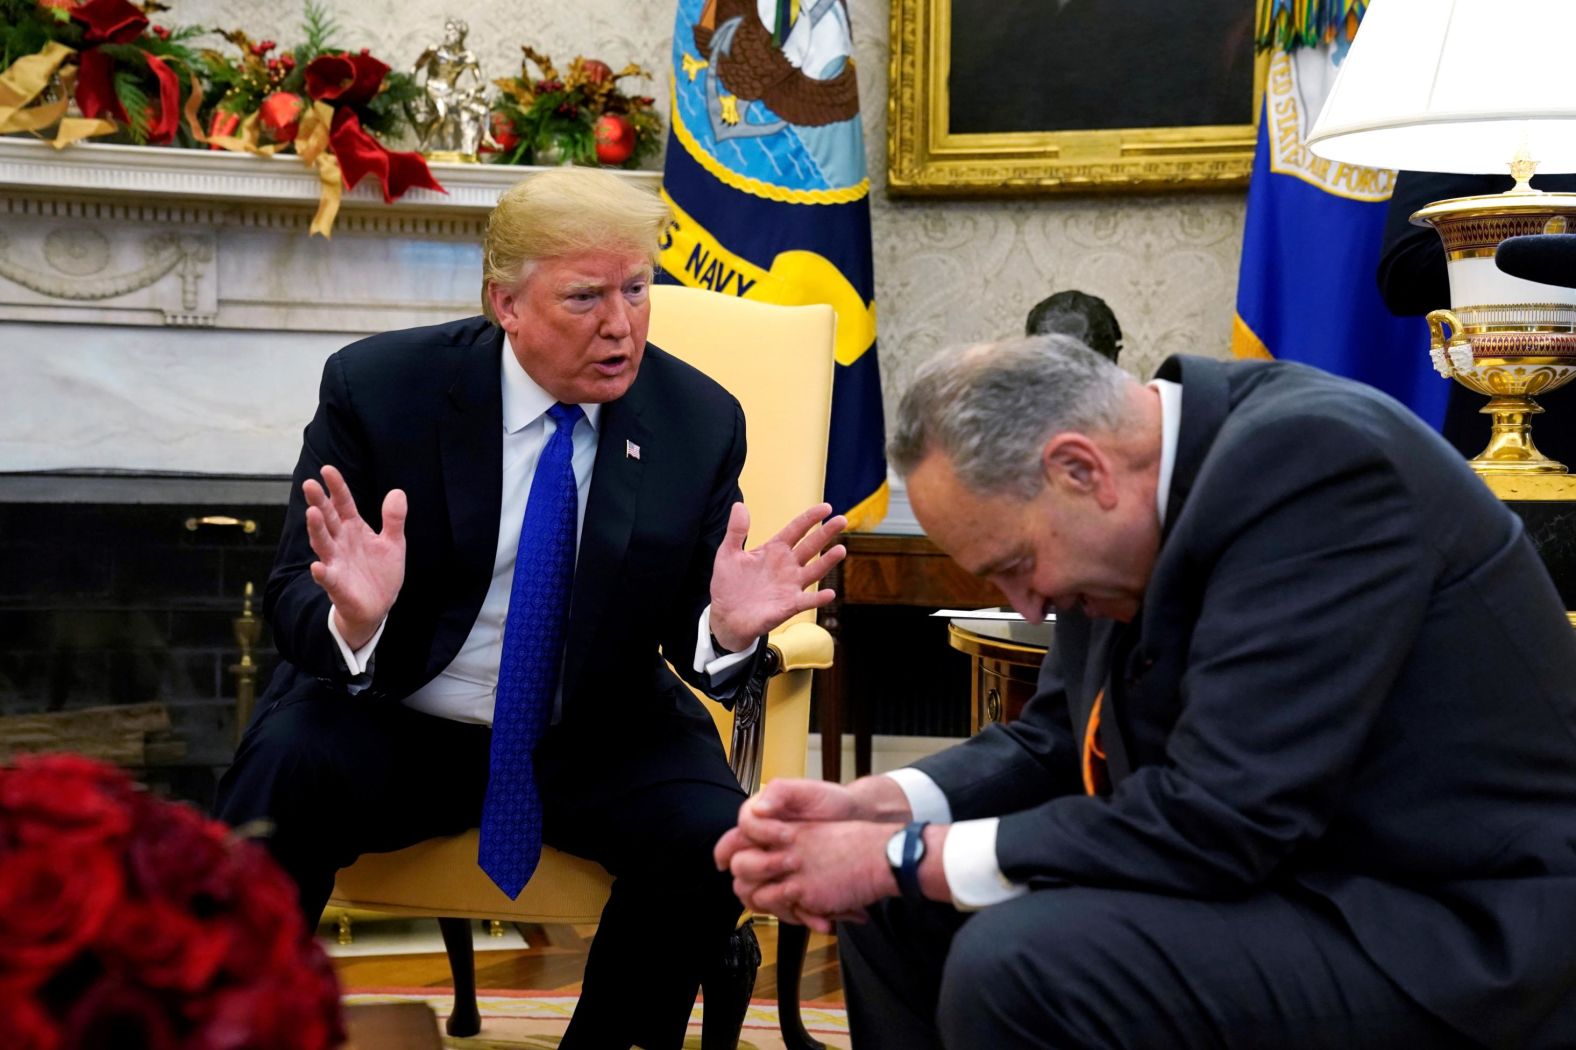 Trump and Senate Minority Leader Chuck Schumer are seen during a meeting in the Oval Office with House Minority Leader Nancy Pelosi and Vice President Mike Pence. In the meeting, part of which was open to the media, <a href="https://www.cnn.com/2018/12/12/politics/gallery/trump-pelosi-schumer-oval-office/index.html" target="_blank">Trump clashed with Schumer and Pelosi over funding for a border wall</a> and the threat of a government shutdown. "I am proud to shut down the government for border security, Chuck," Trump said.